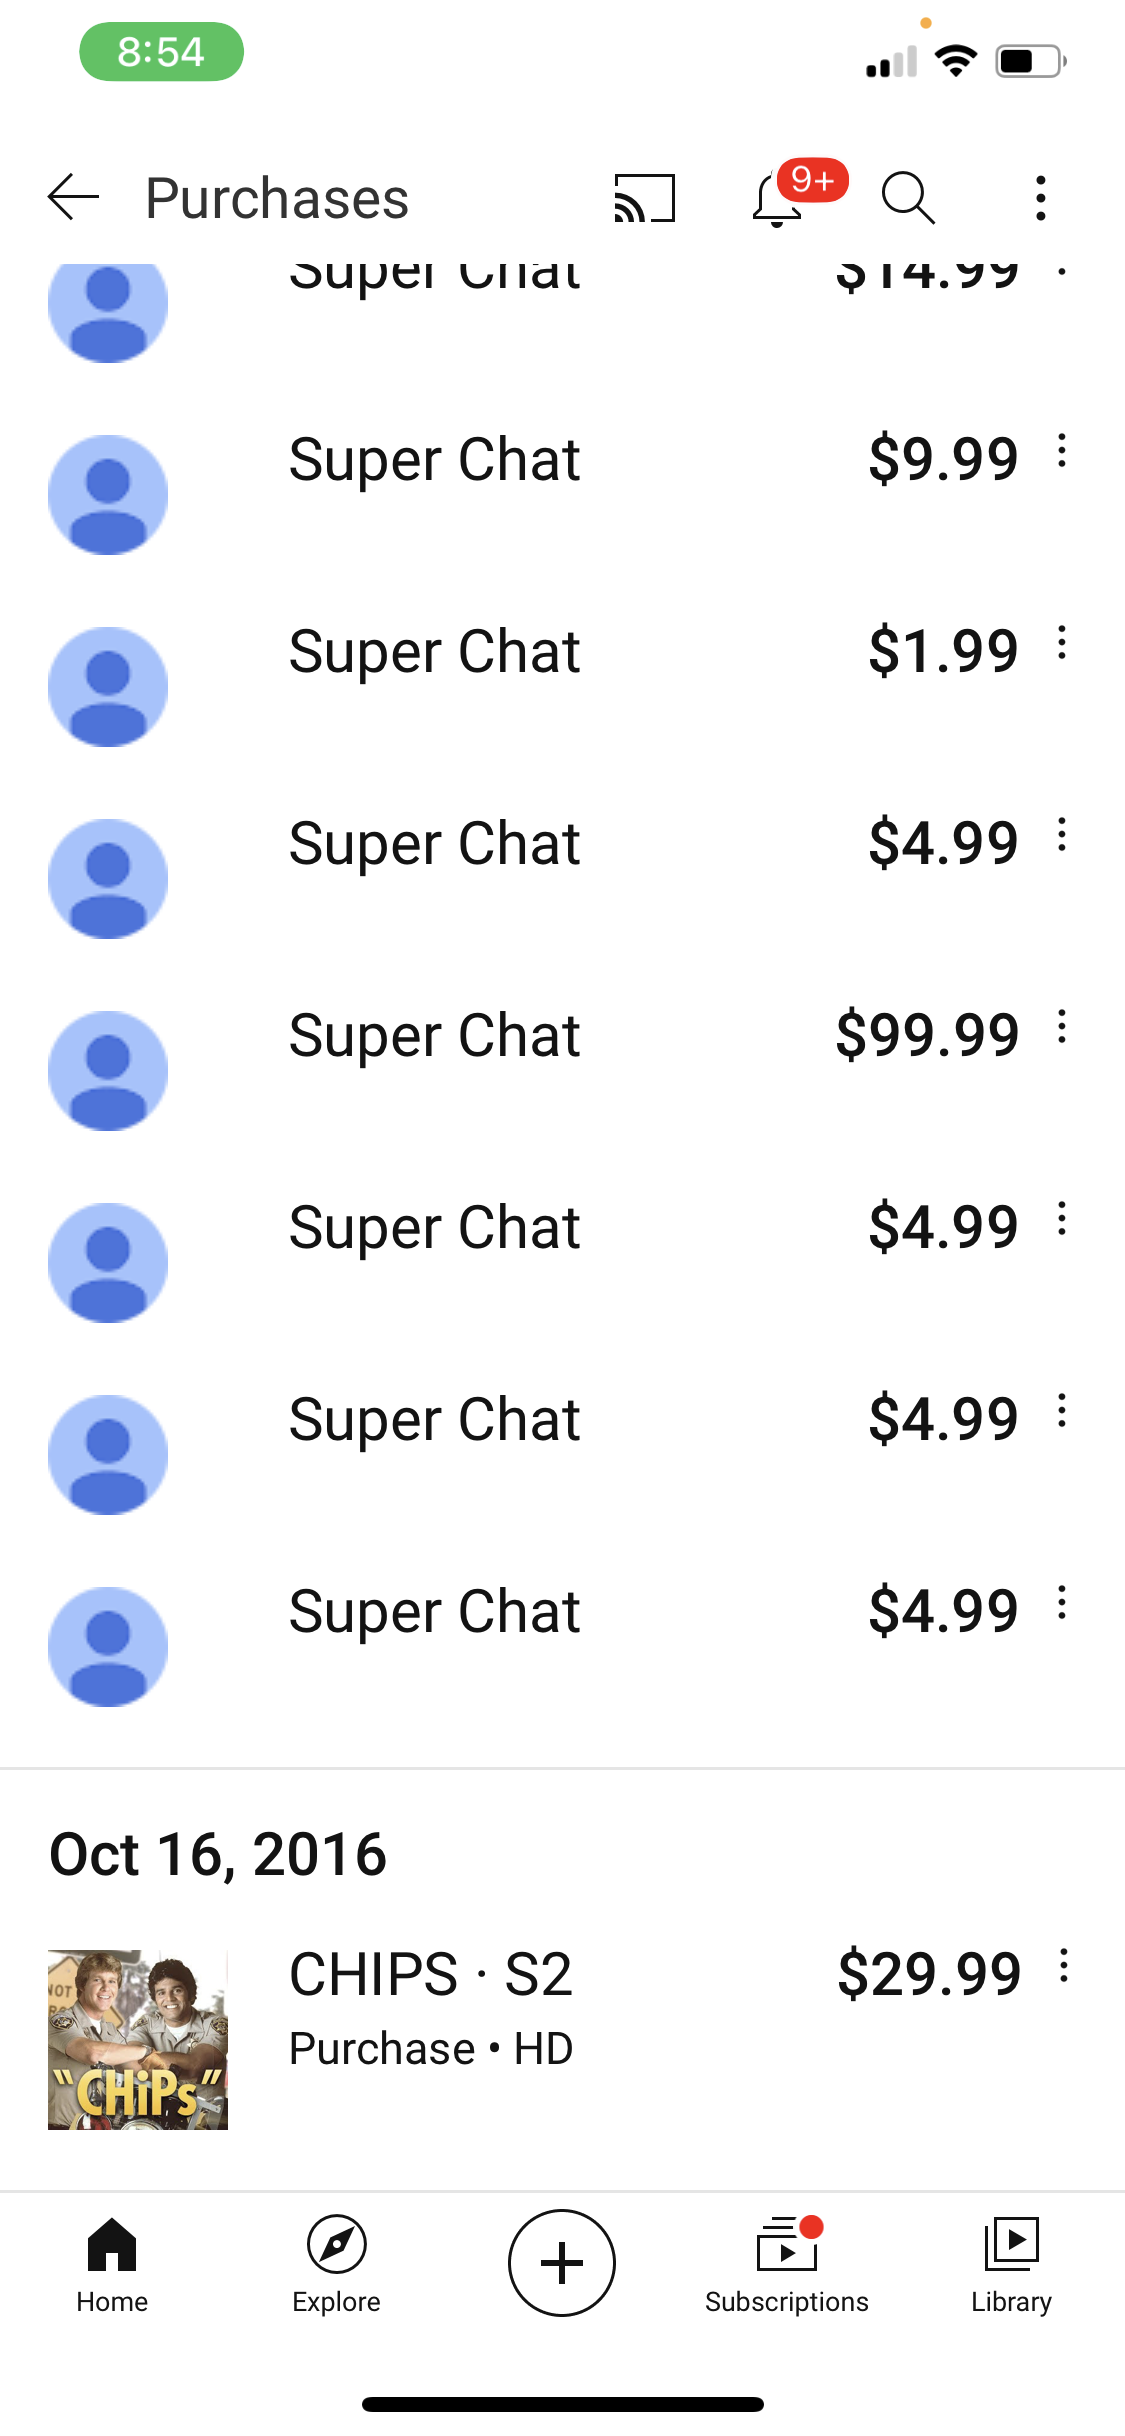 Can super chat track my bank account